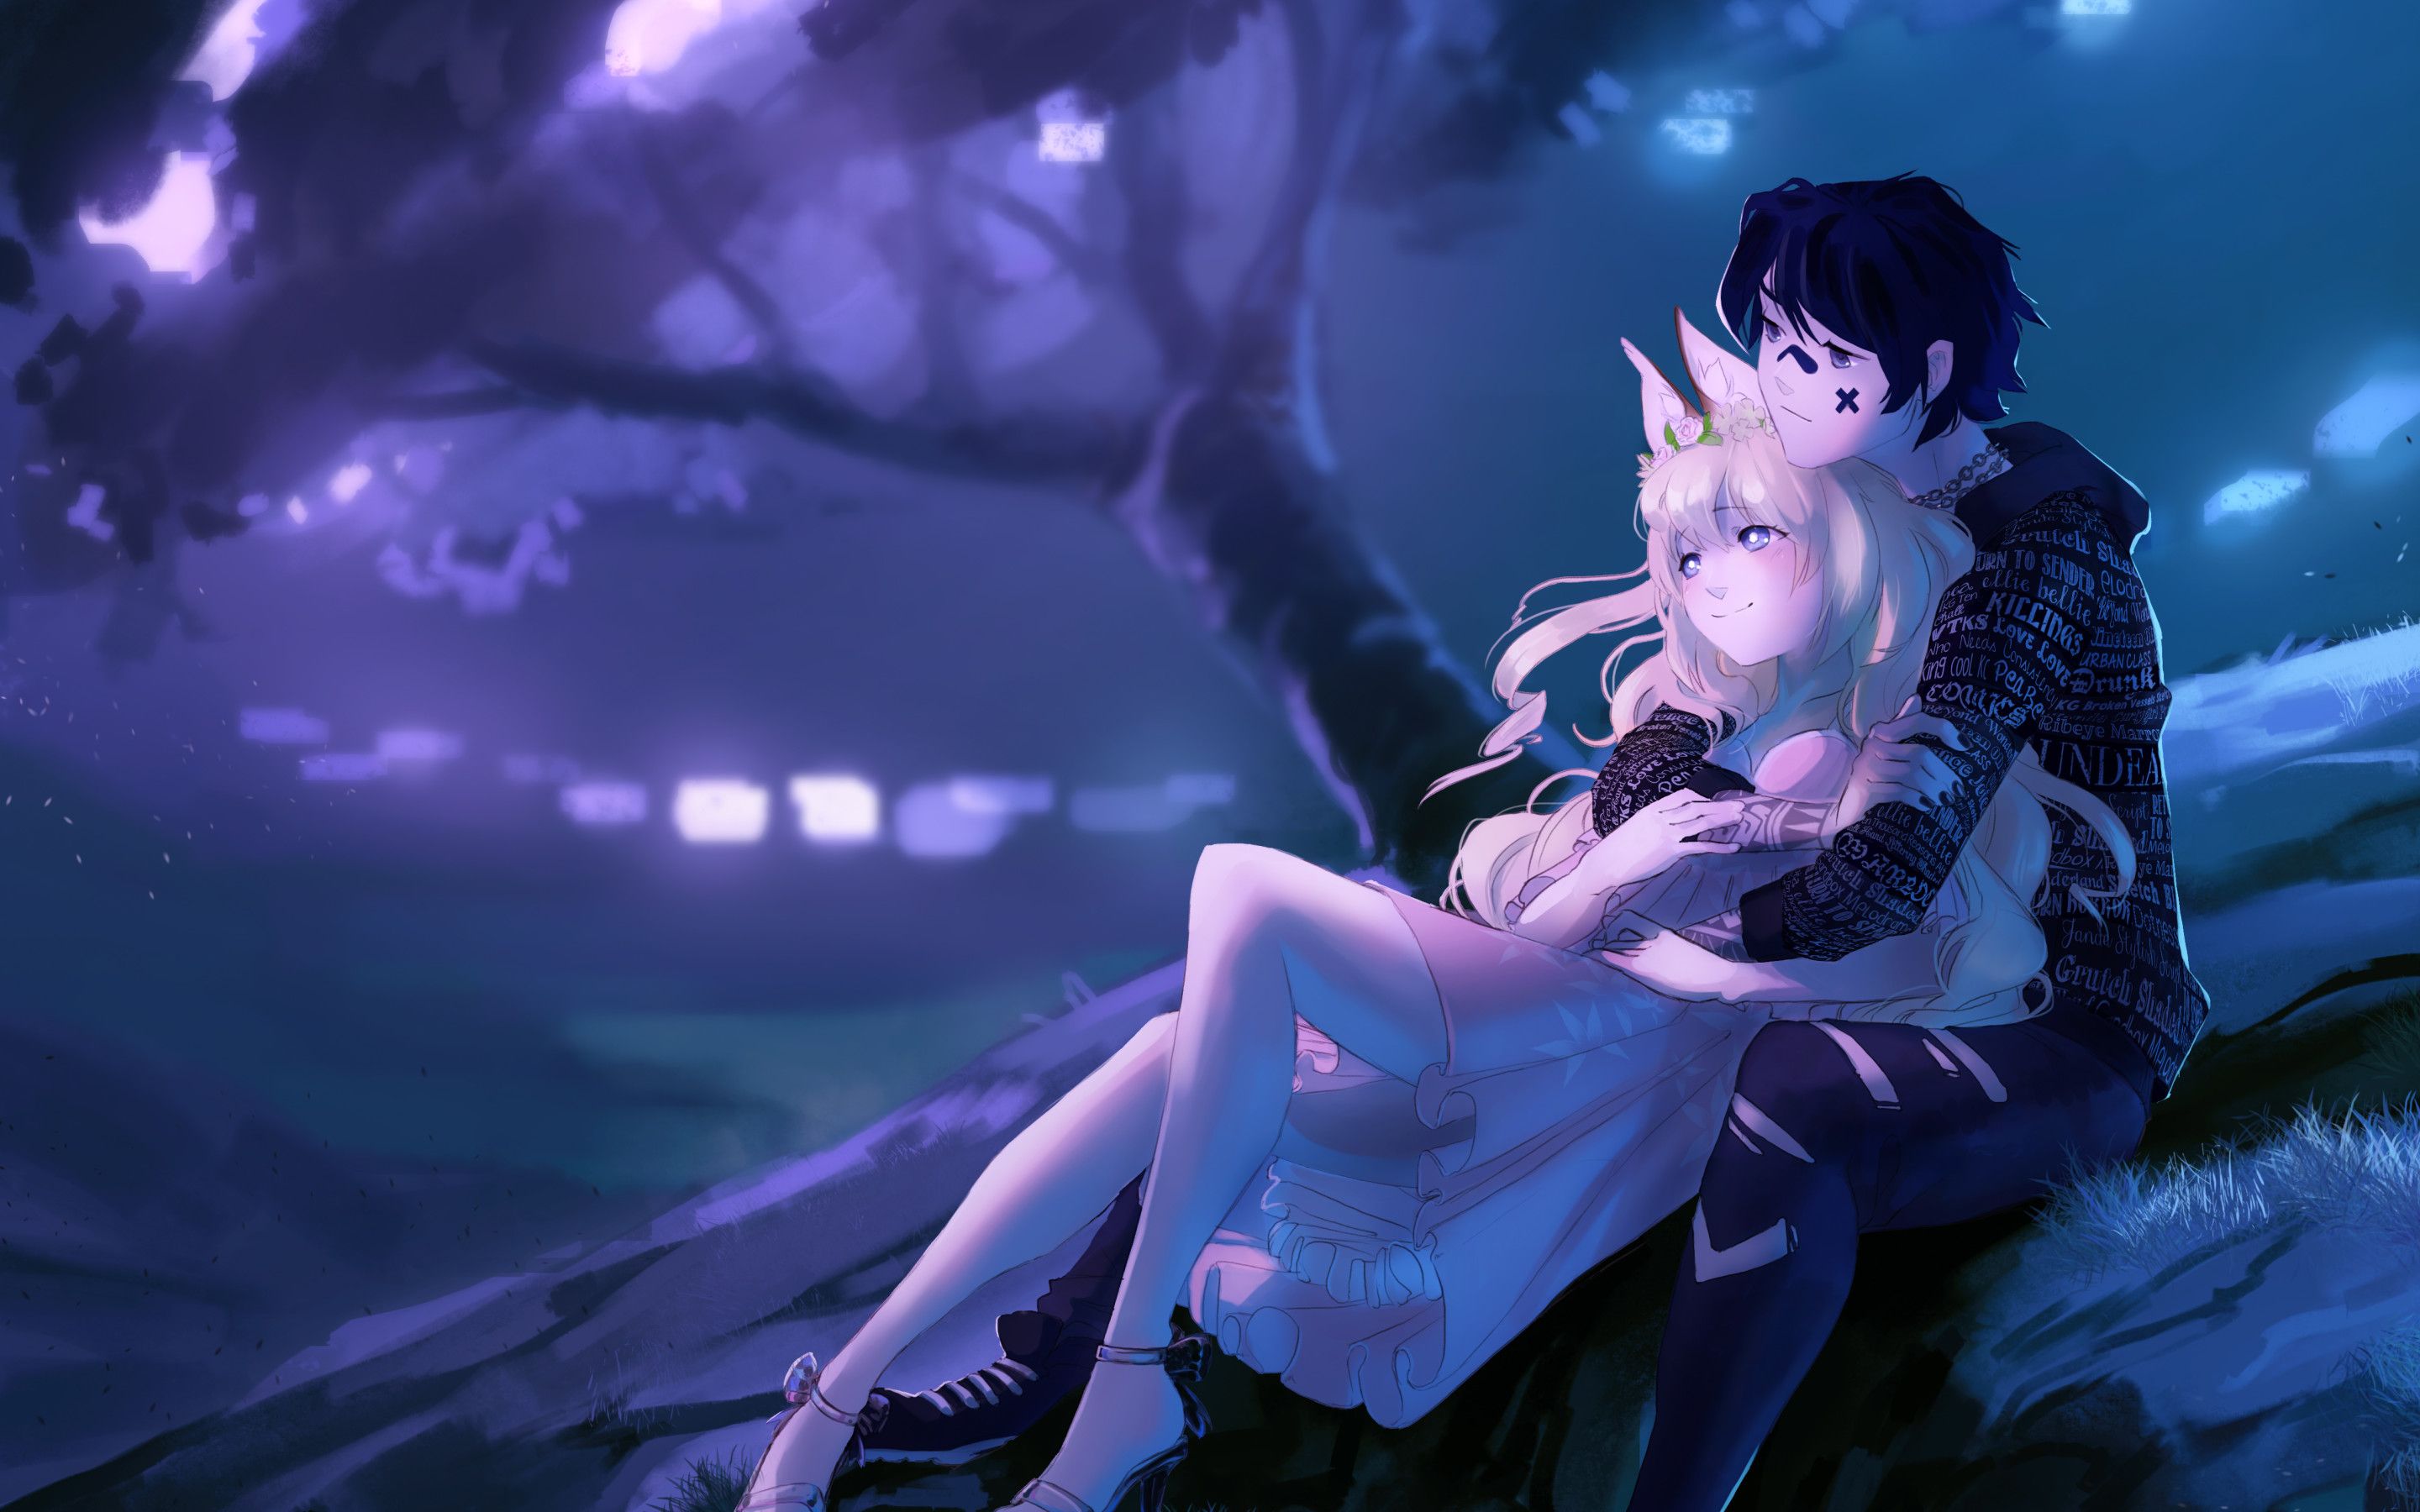 Anime Couple 4k Wallpapers - Wallpaper Cave